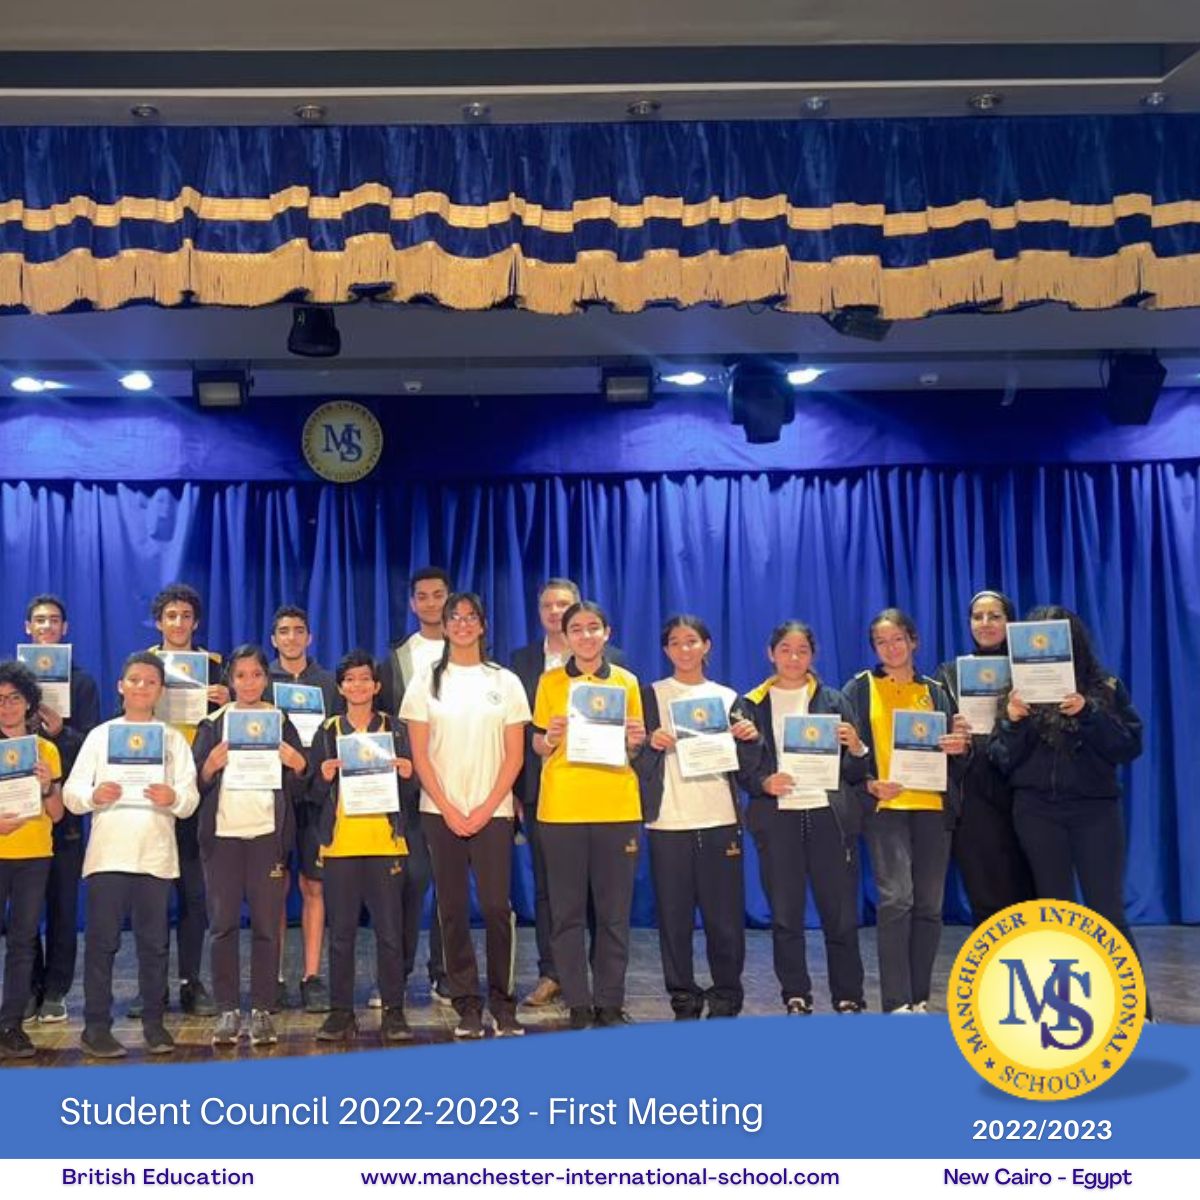 Student Council 2022-2023 : First Meeting